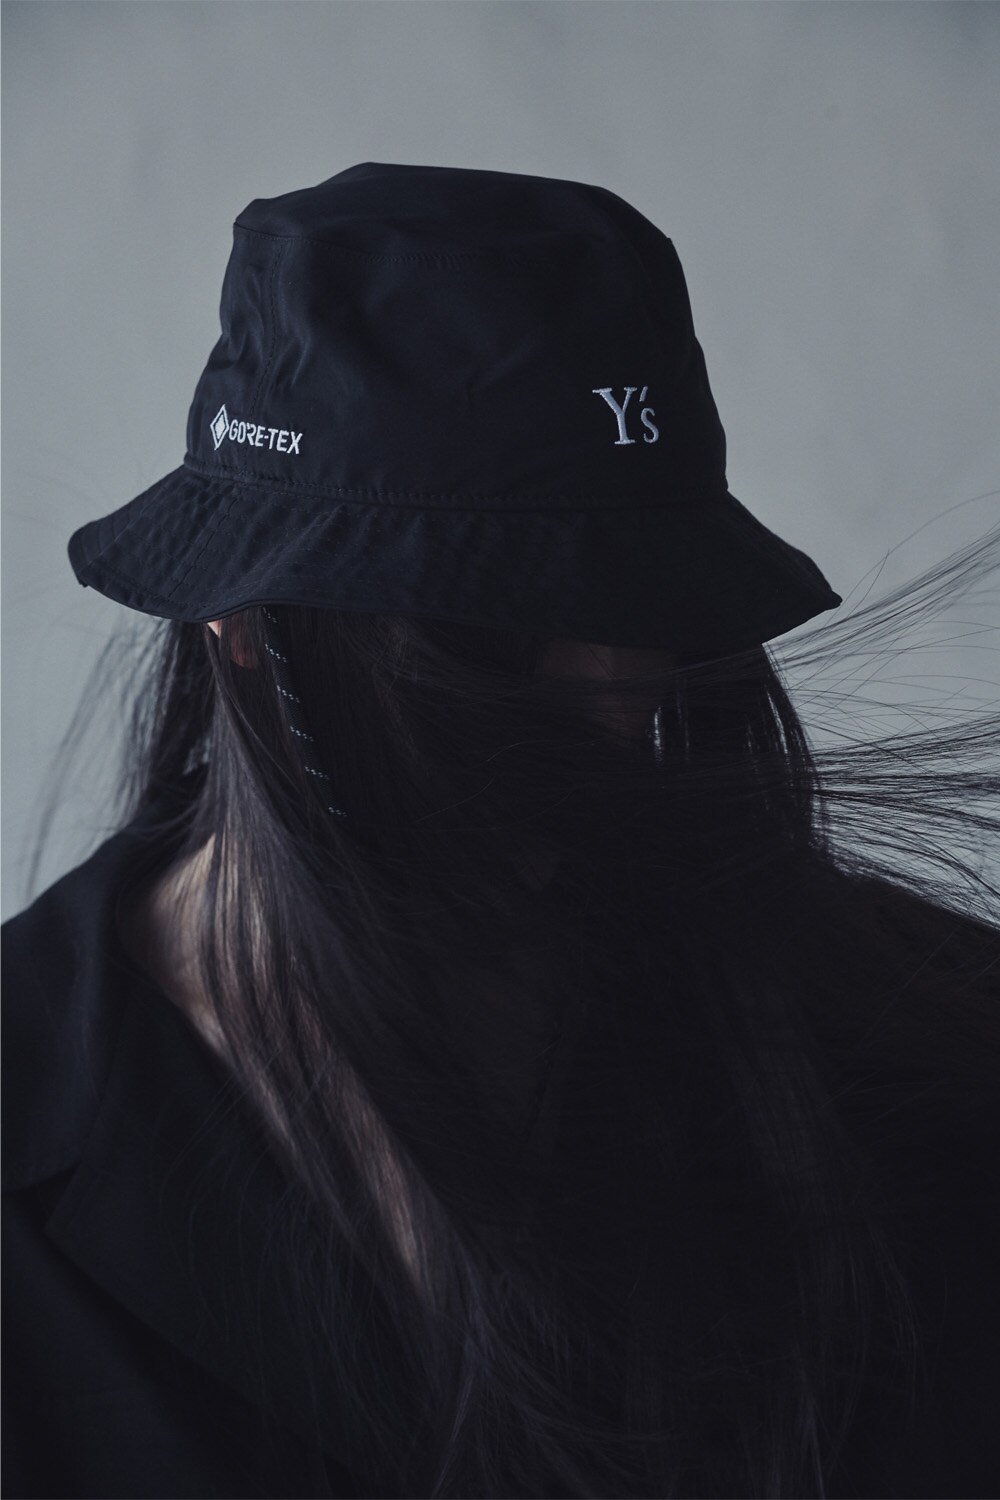 Y’s NEW ERA S/S22 Collection